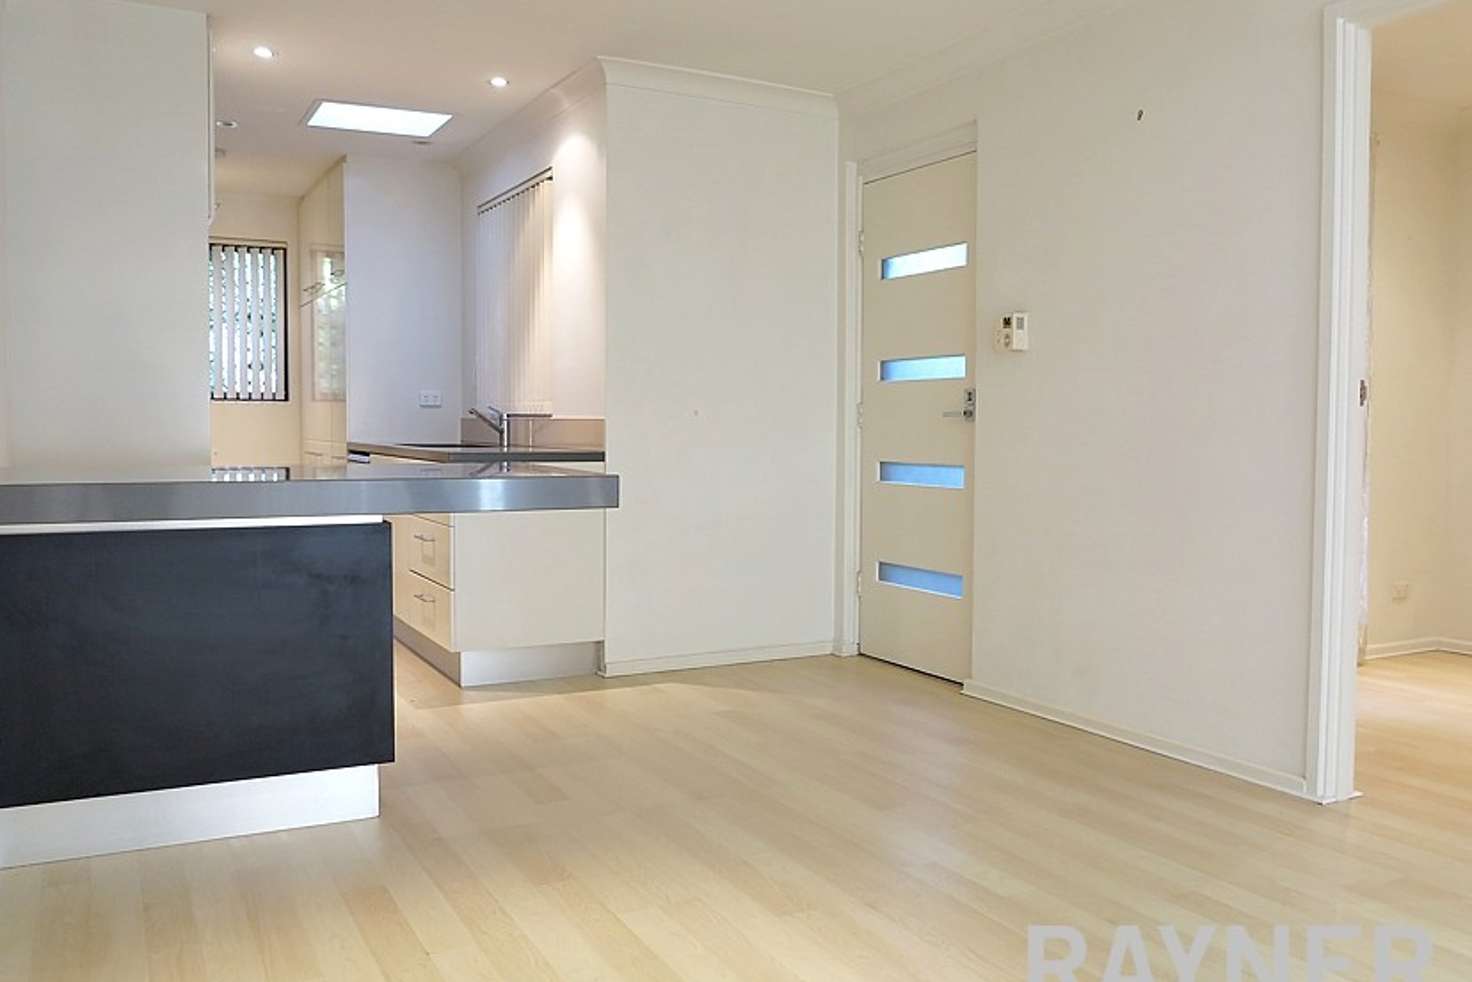 Main view of Homely unit listing, 20 Namatjira Place, Leederville WA 6007